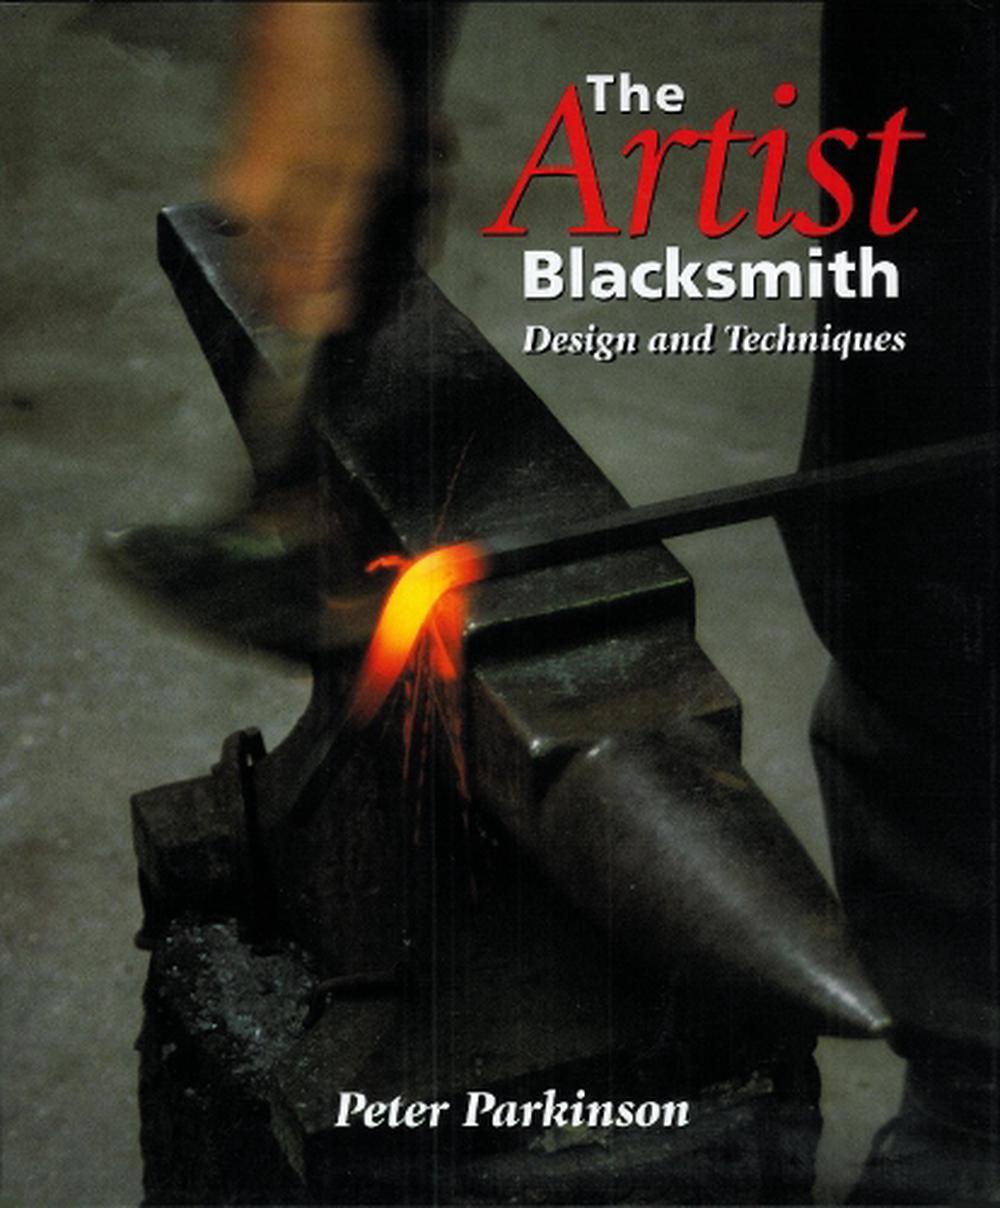 The Artist Blacksmith Design and Techniques by Peter Hubert Parkin